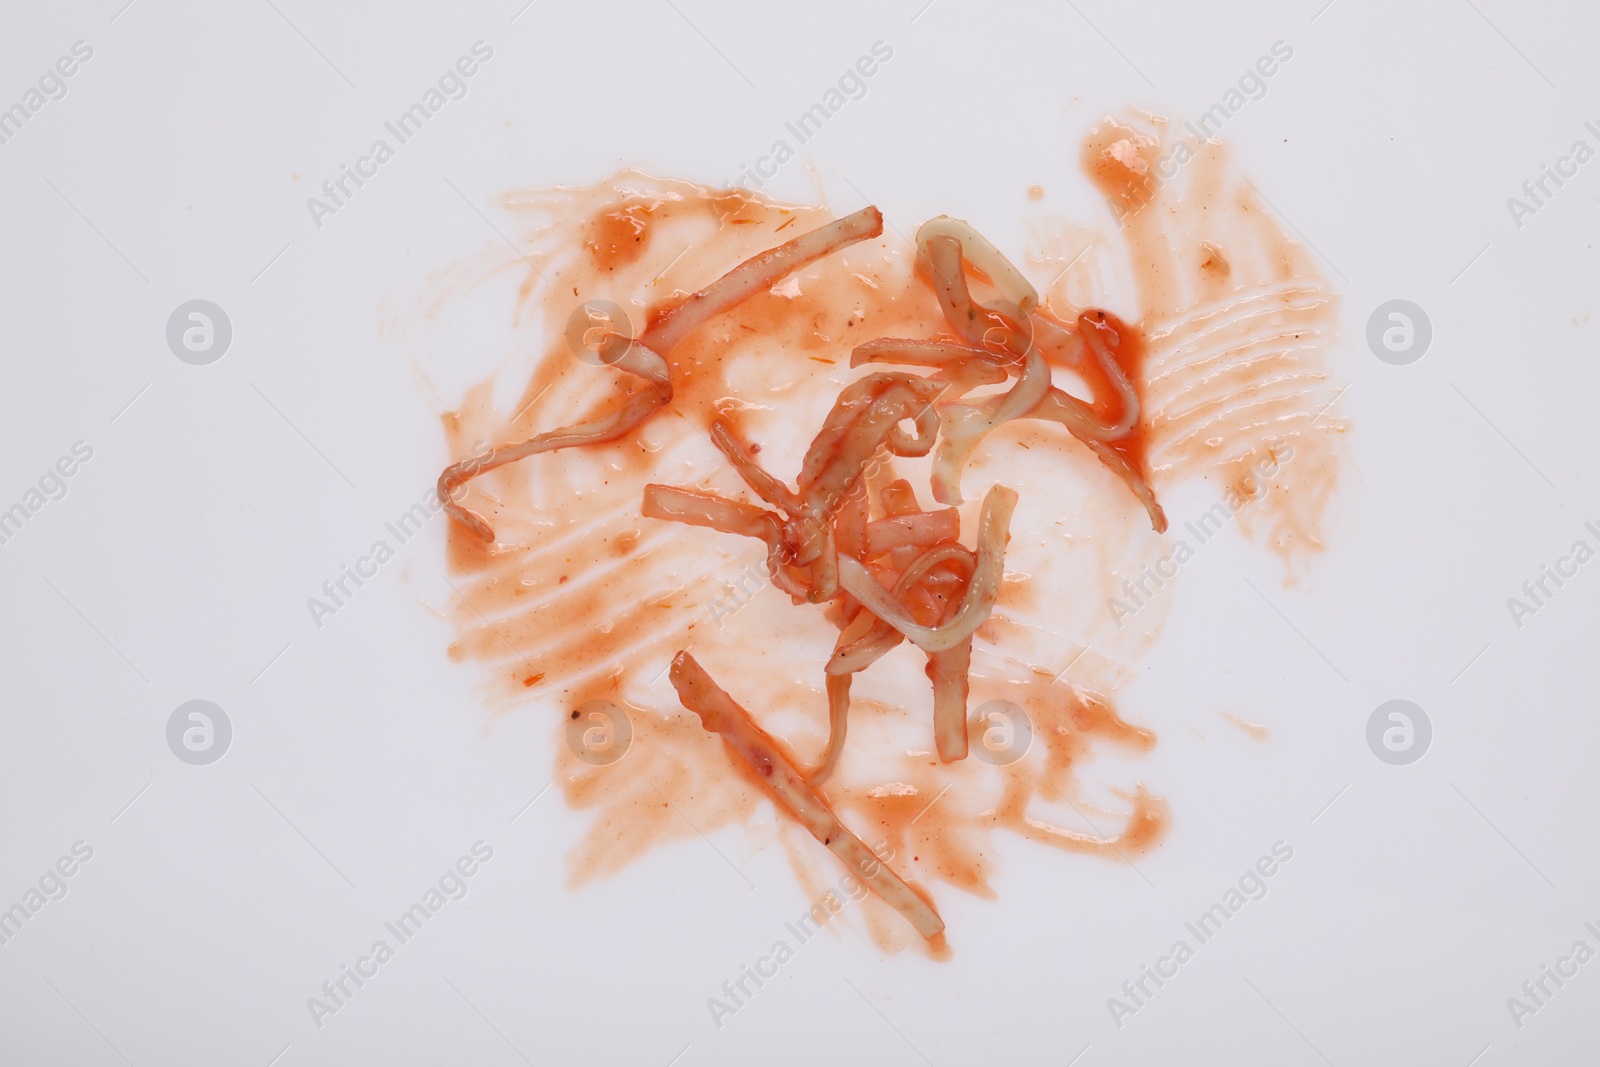 Photo of Smear of sauce and pasta on white background, top view